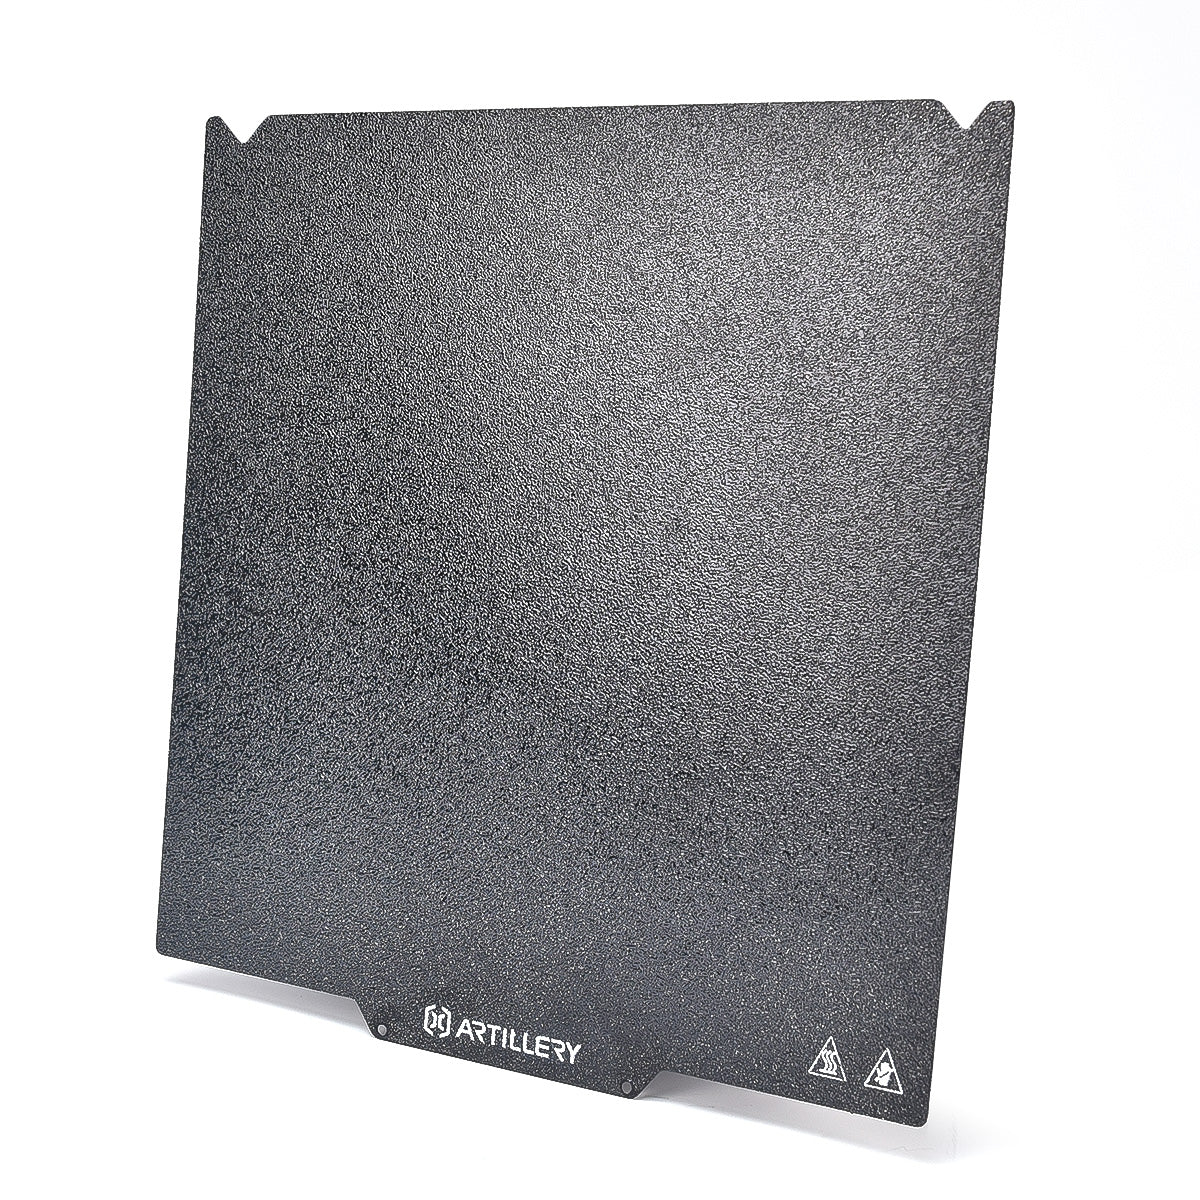 Textured Dual Sided Flexi Magnetic PEI Plate For SW-X4PLUS & SW-X3PLUS